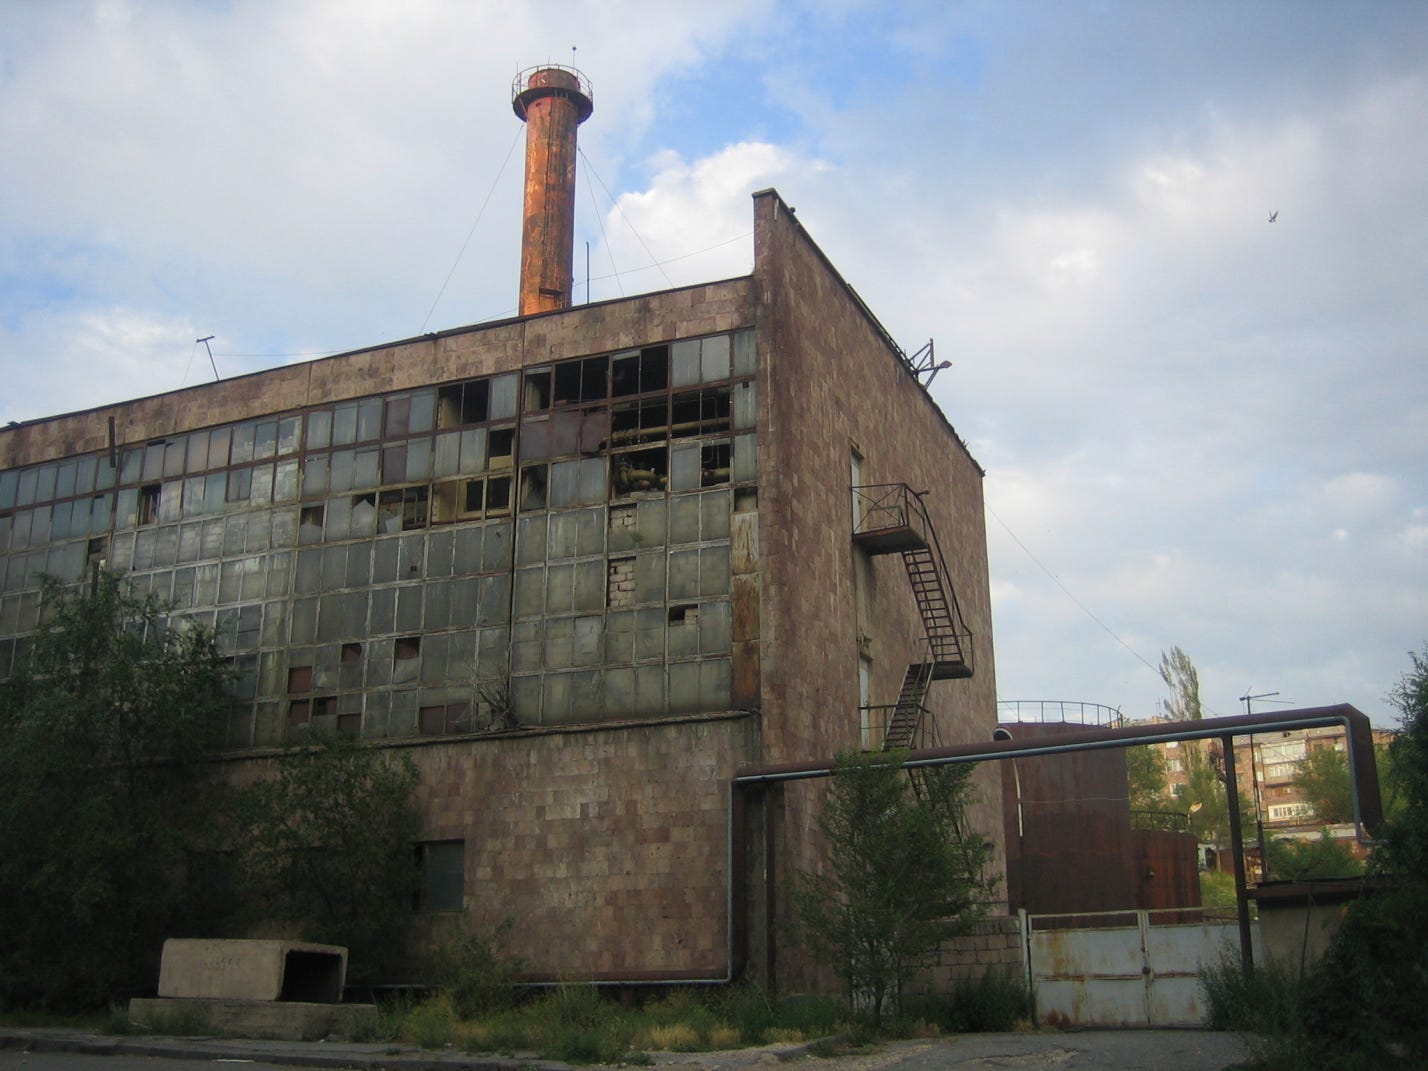 "File:Dilapidated Soviet Factory - panoramio.jpg" by serouj is marked with CC BY-SA 3.0.